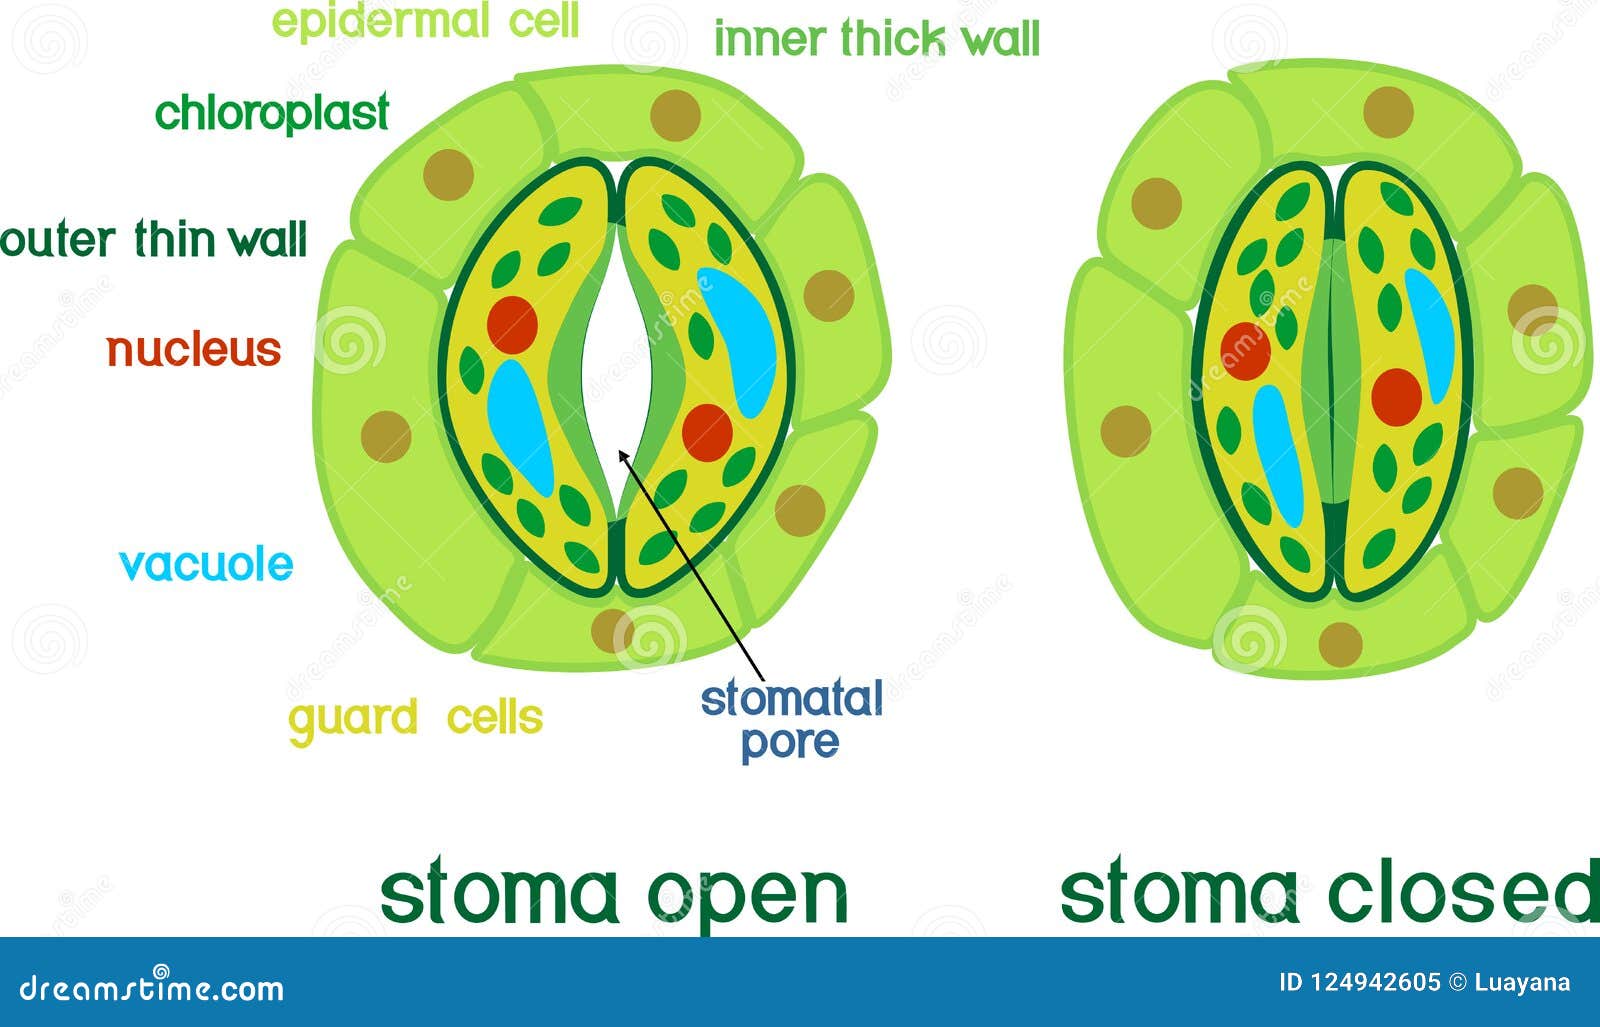 structure of stomatal complex with open and closed stoma with titles